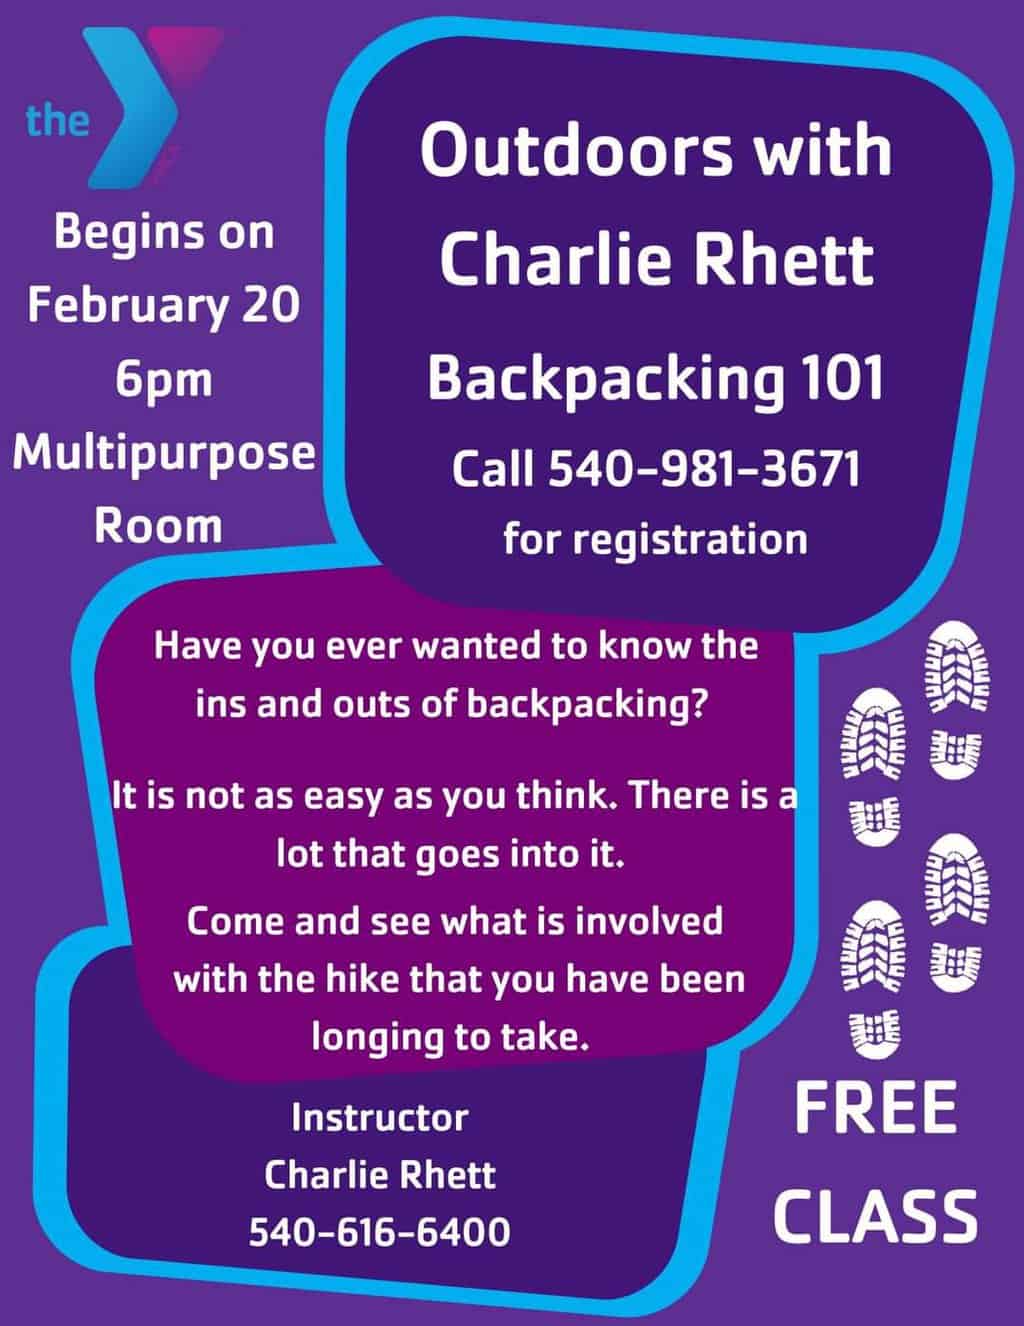 Backpacking 101 offered at the Y